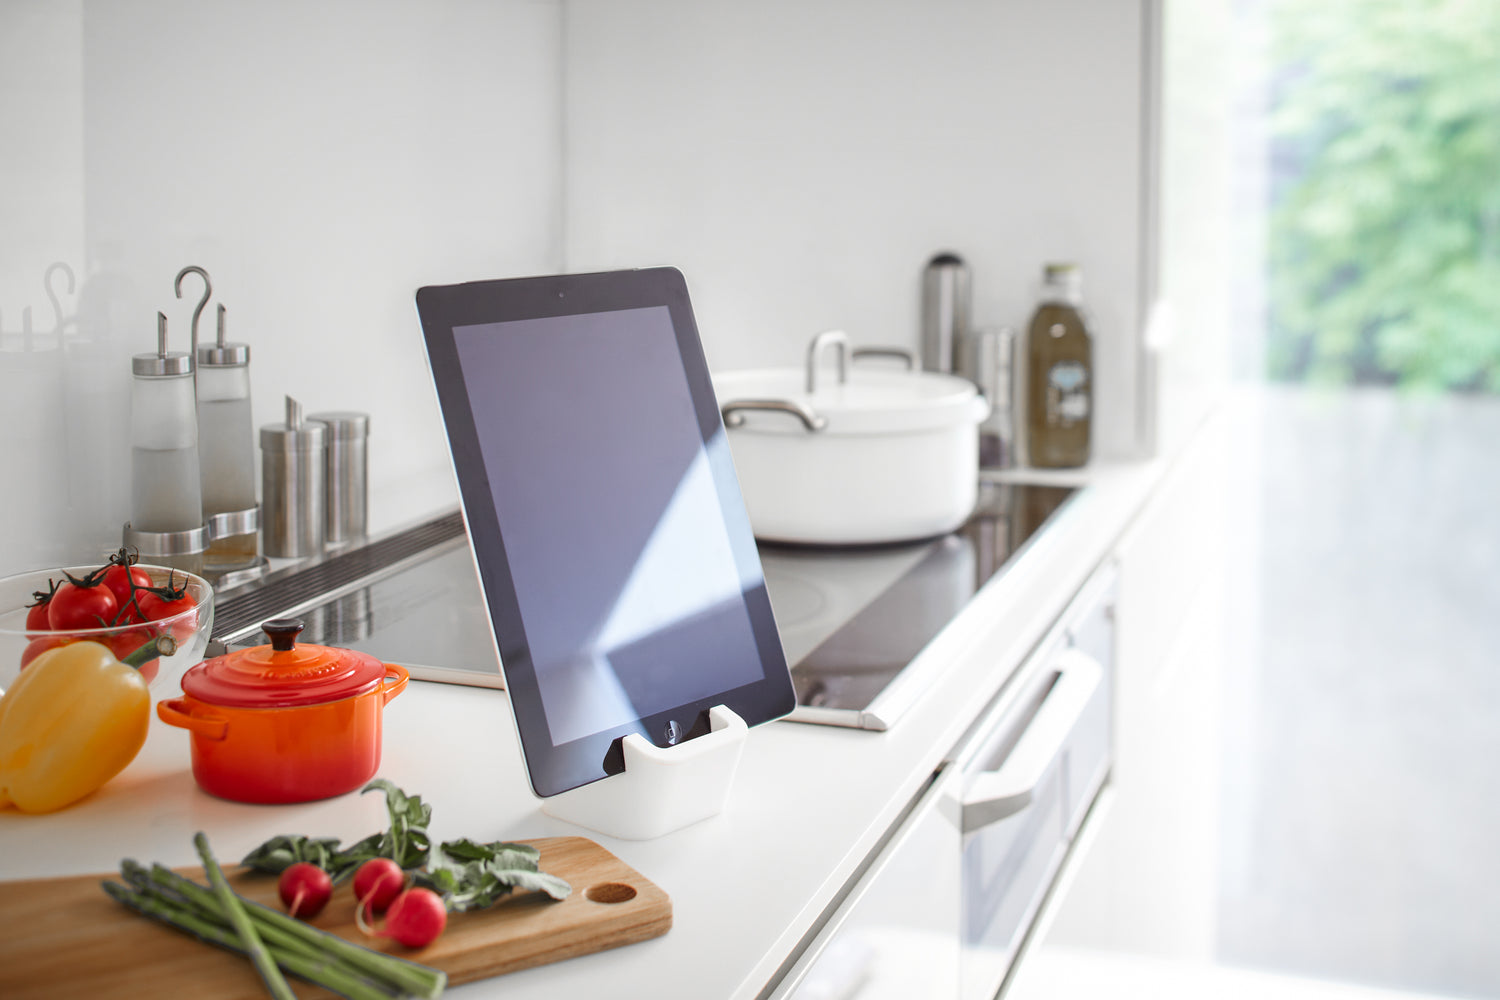 View 3 - Side view of white Tablet Stand holding tablet in kitchen by Yamazaki Home.